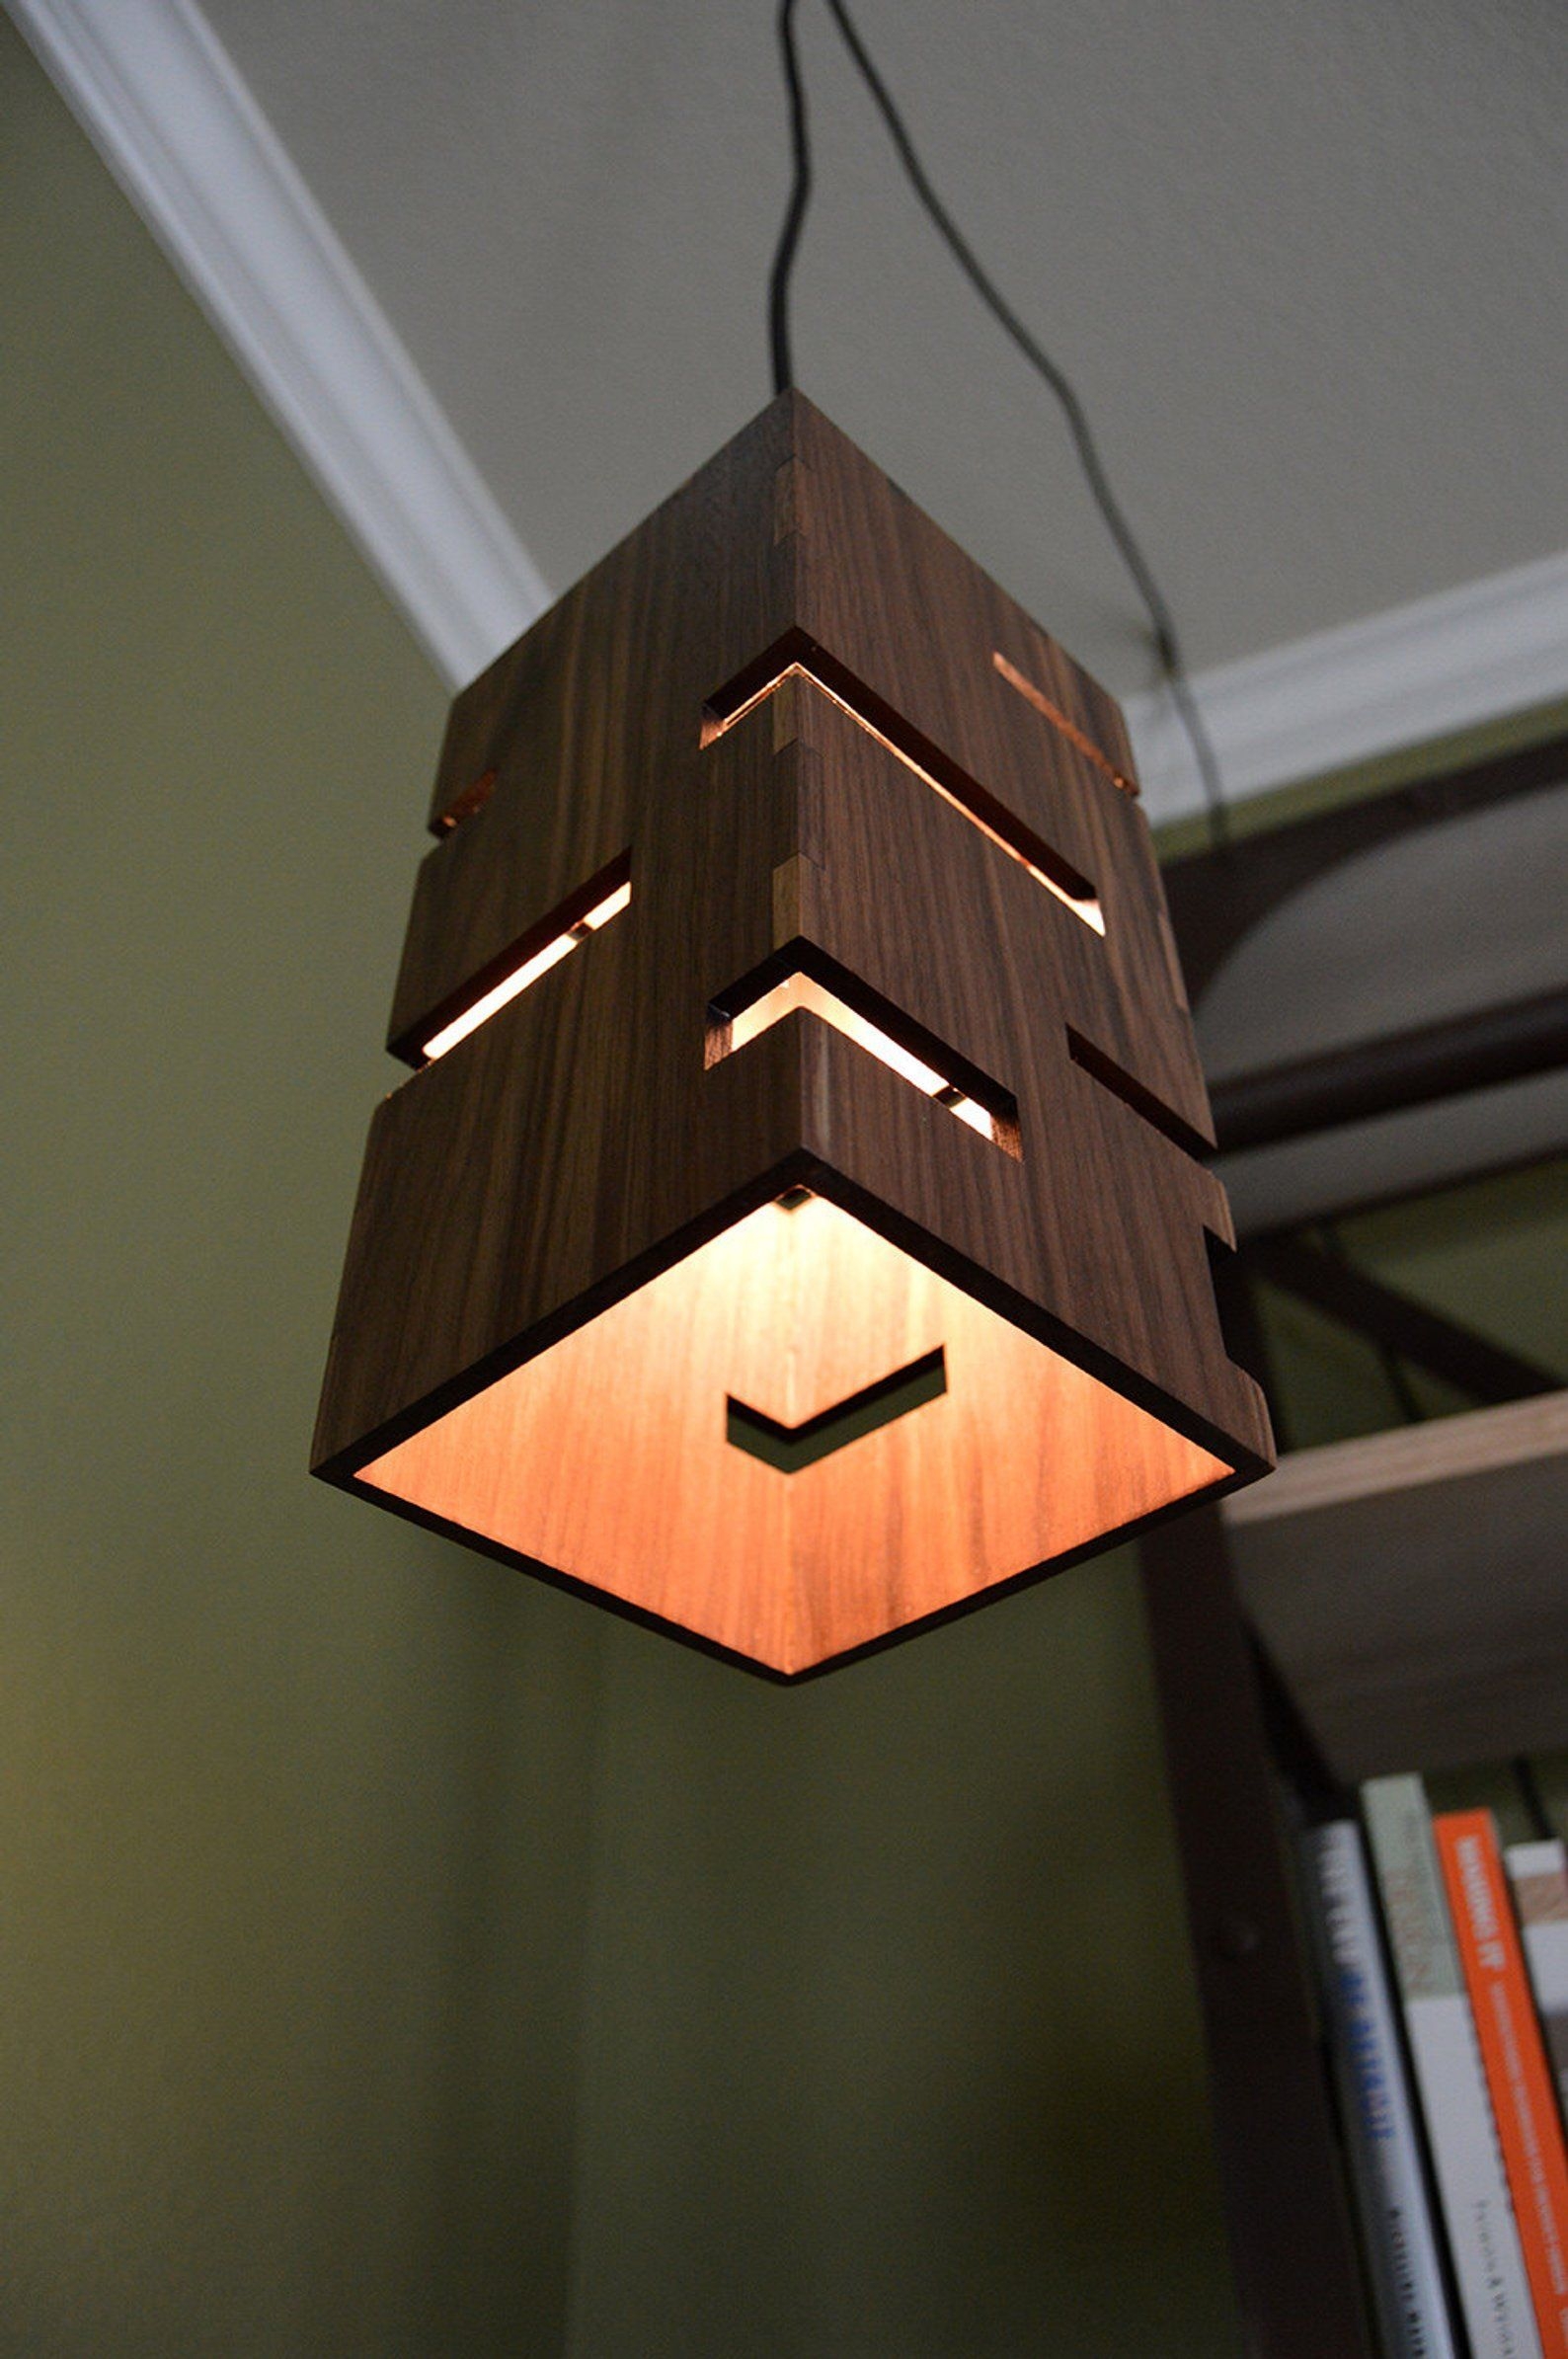 Enchanting Diy Wooden Lamp Designs Ideas To Spice Up Your Living Space09